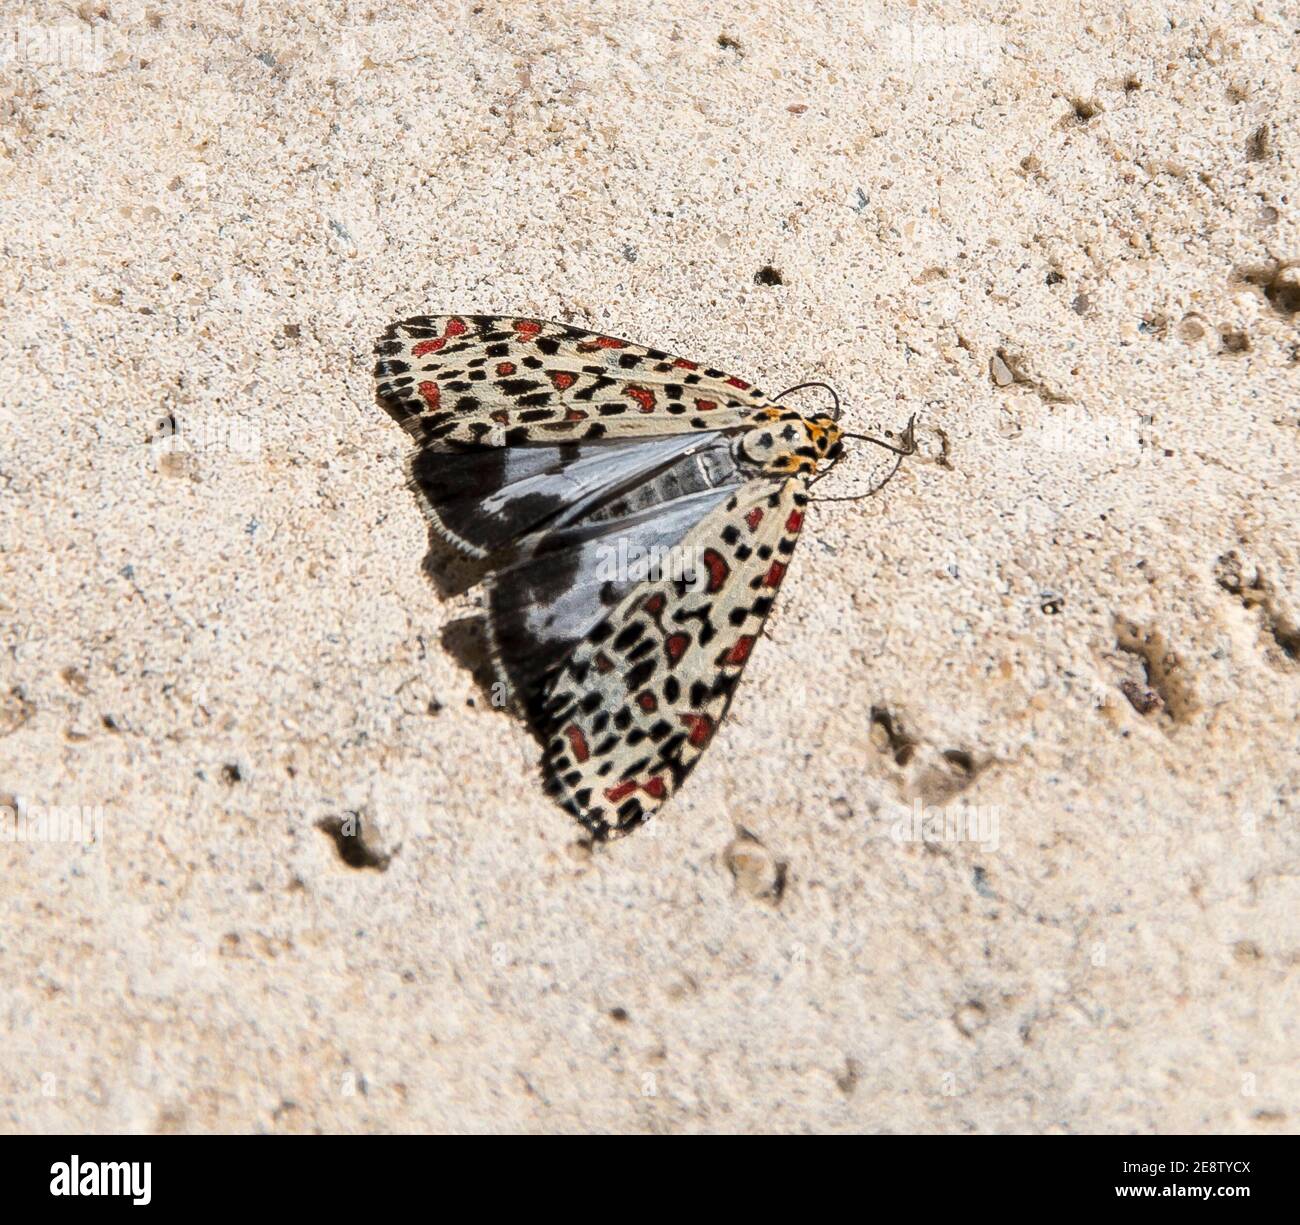 Heliotrope moth, utetheisa pulchelloides, on a sunlit path. Wings folded to show small spotted pattern. Queensland, Australia. Stock Photo